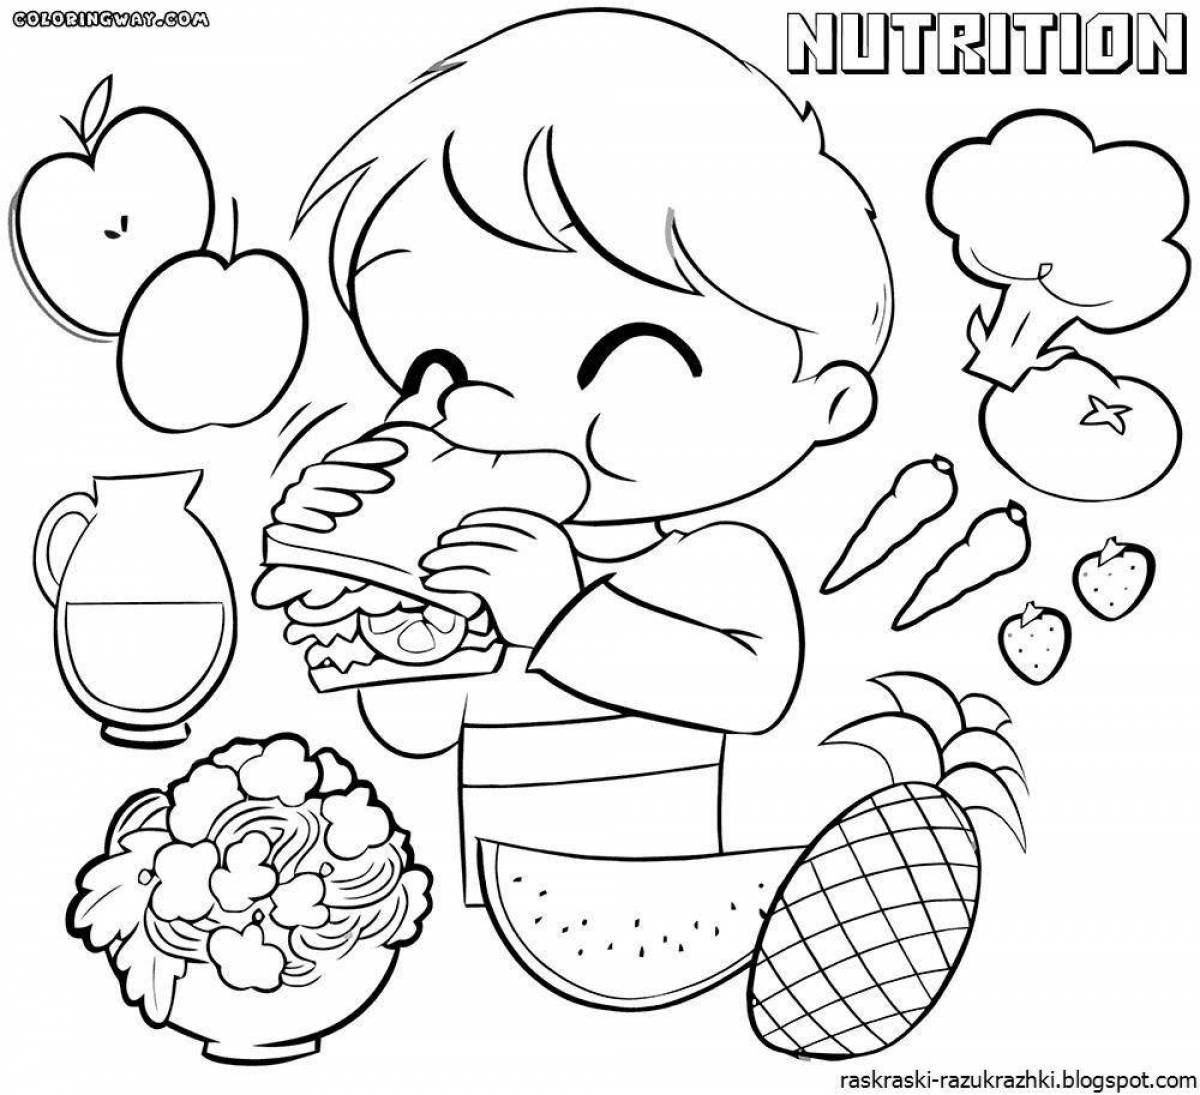 Fun coloring book about healthy eating